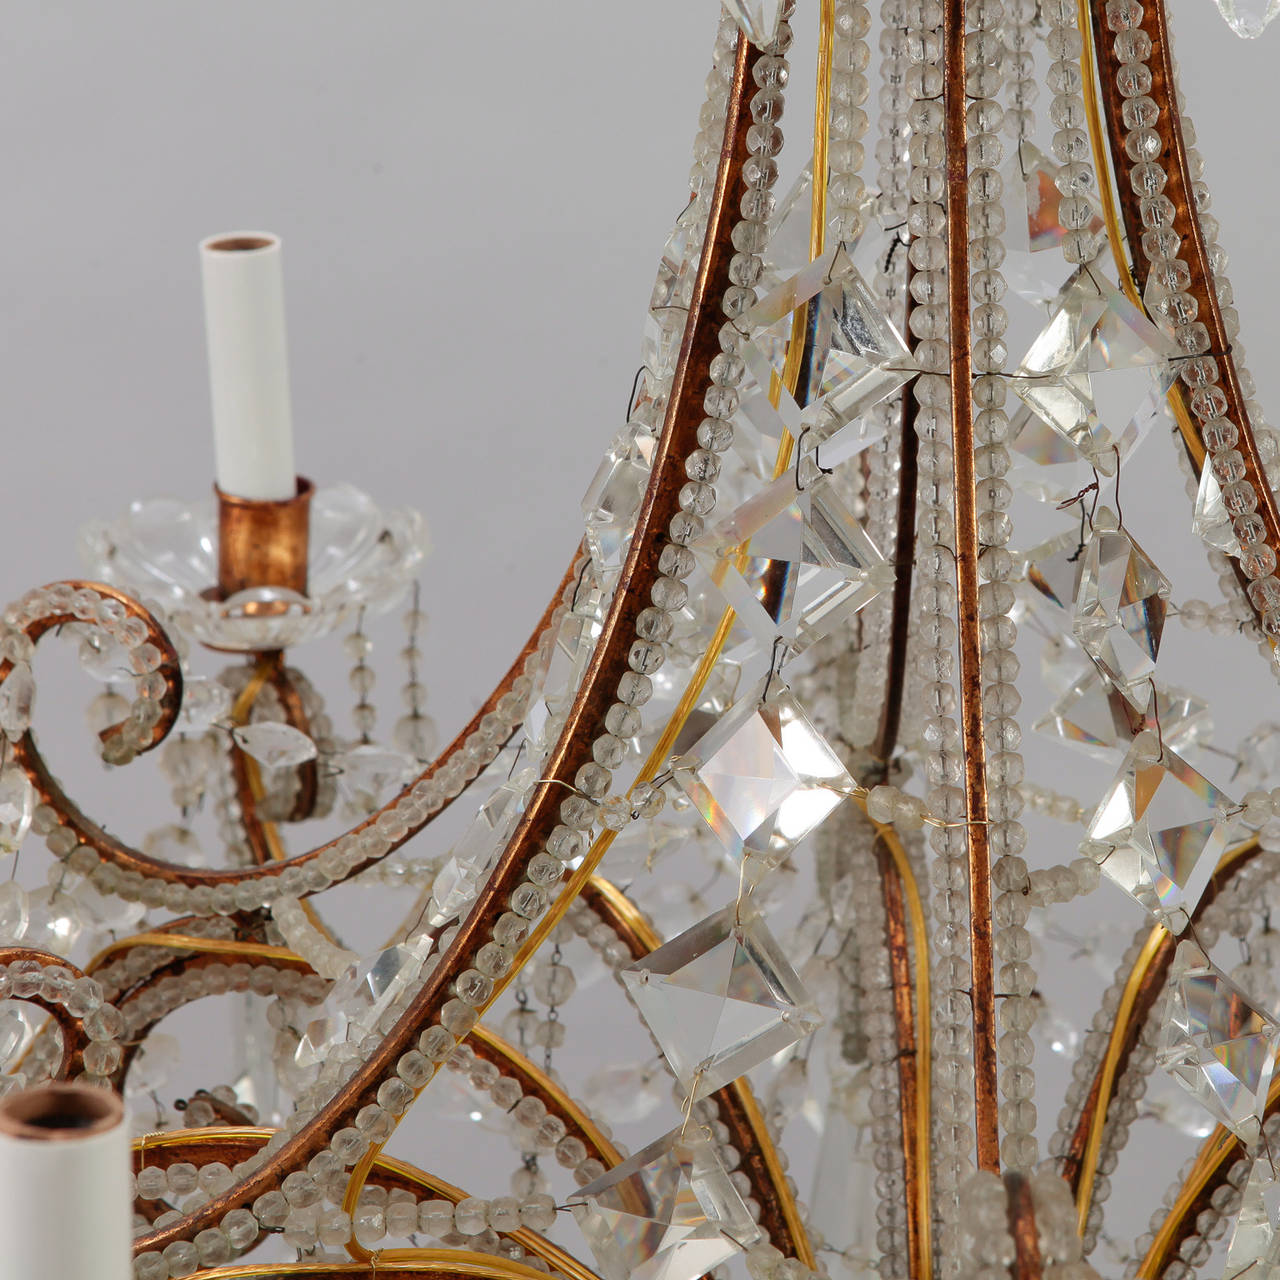 20th Century Twelve-Light Italian Crystal Chandelier with Large Drops and Lots of Beading